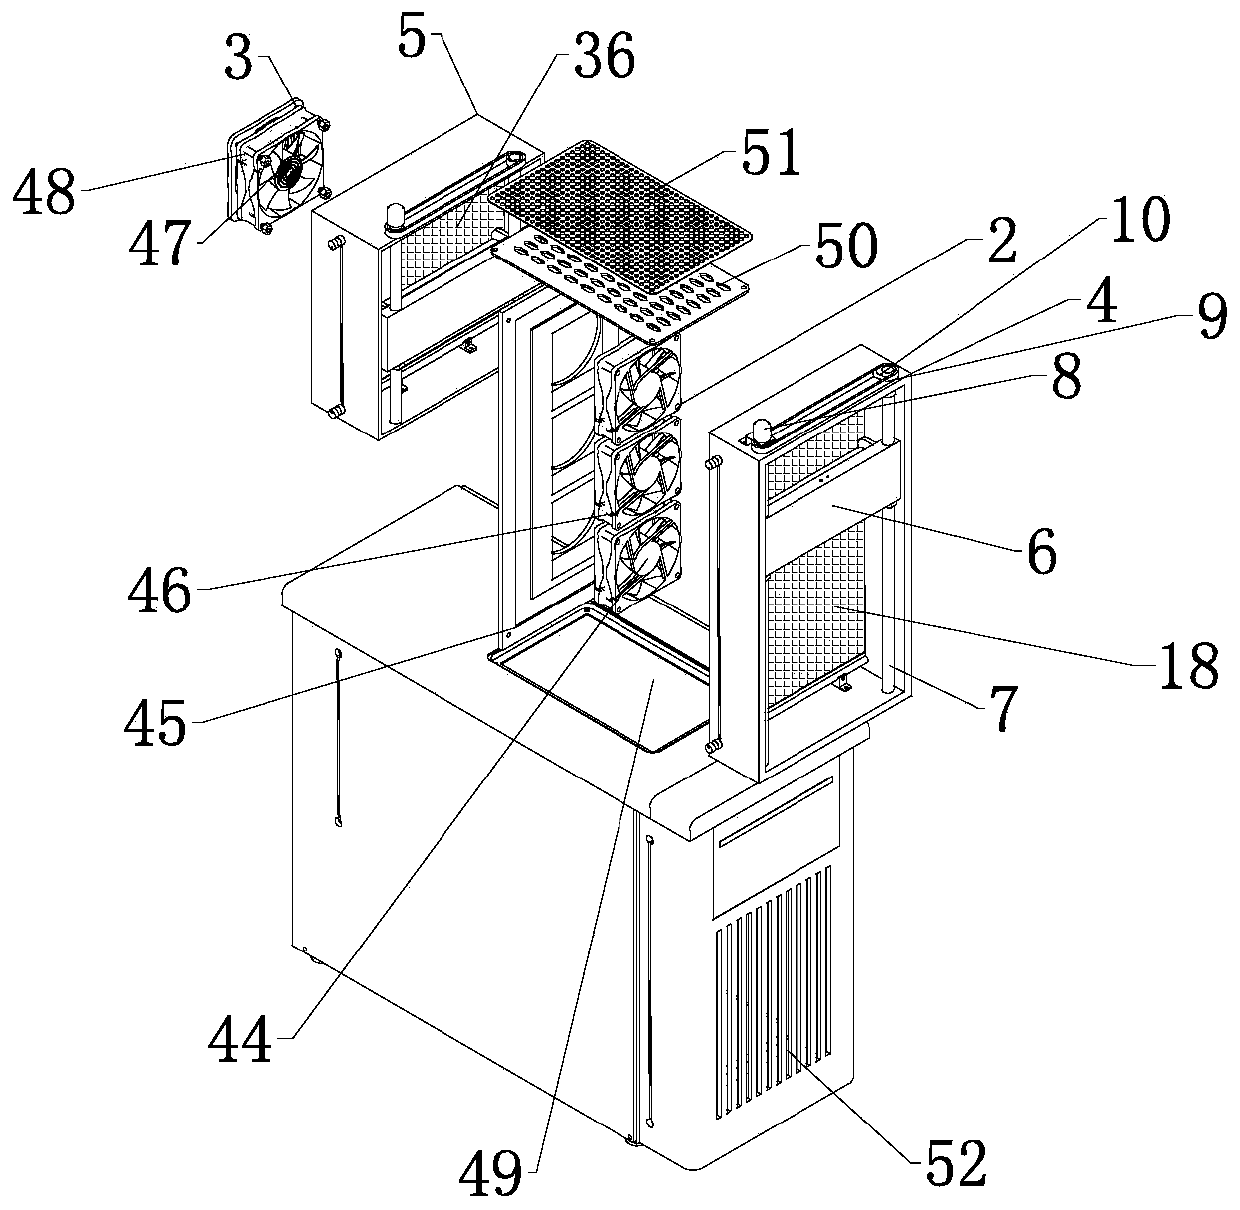 Auxiliary heat dissipation and dust removal device for computer case